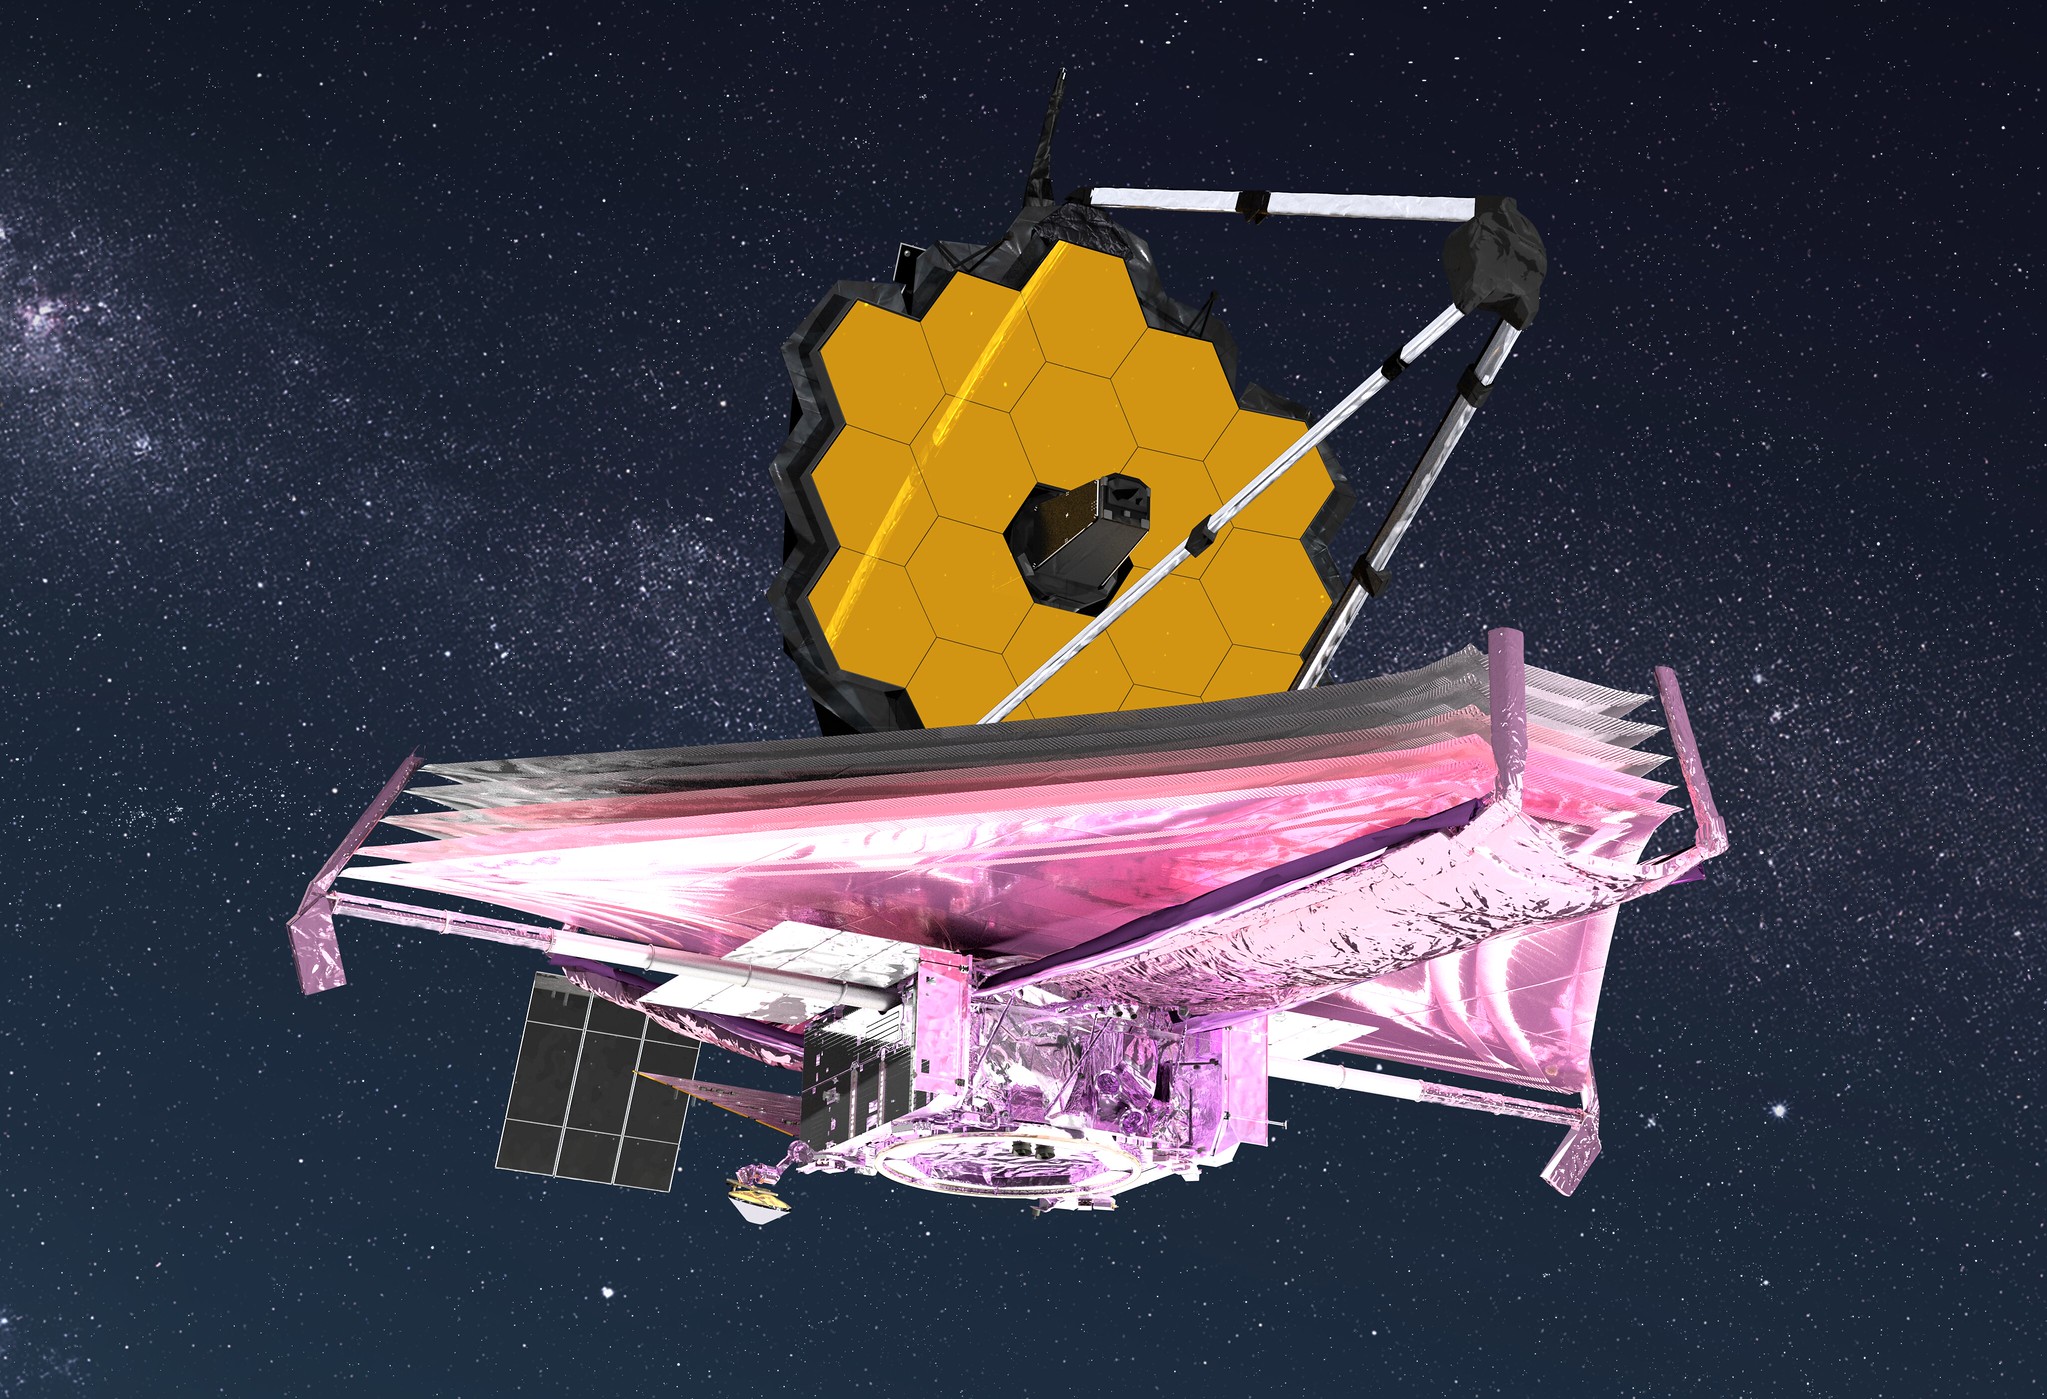 NASA's James Webb Space Telescope, seen here in an artist's illustration, deployed its final primary mirror segment on Jan. 8, 2022, a critical milestone for its mission to study the universe.